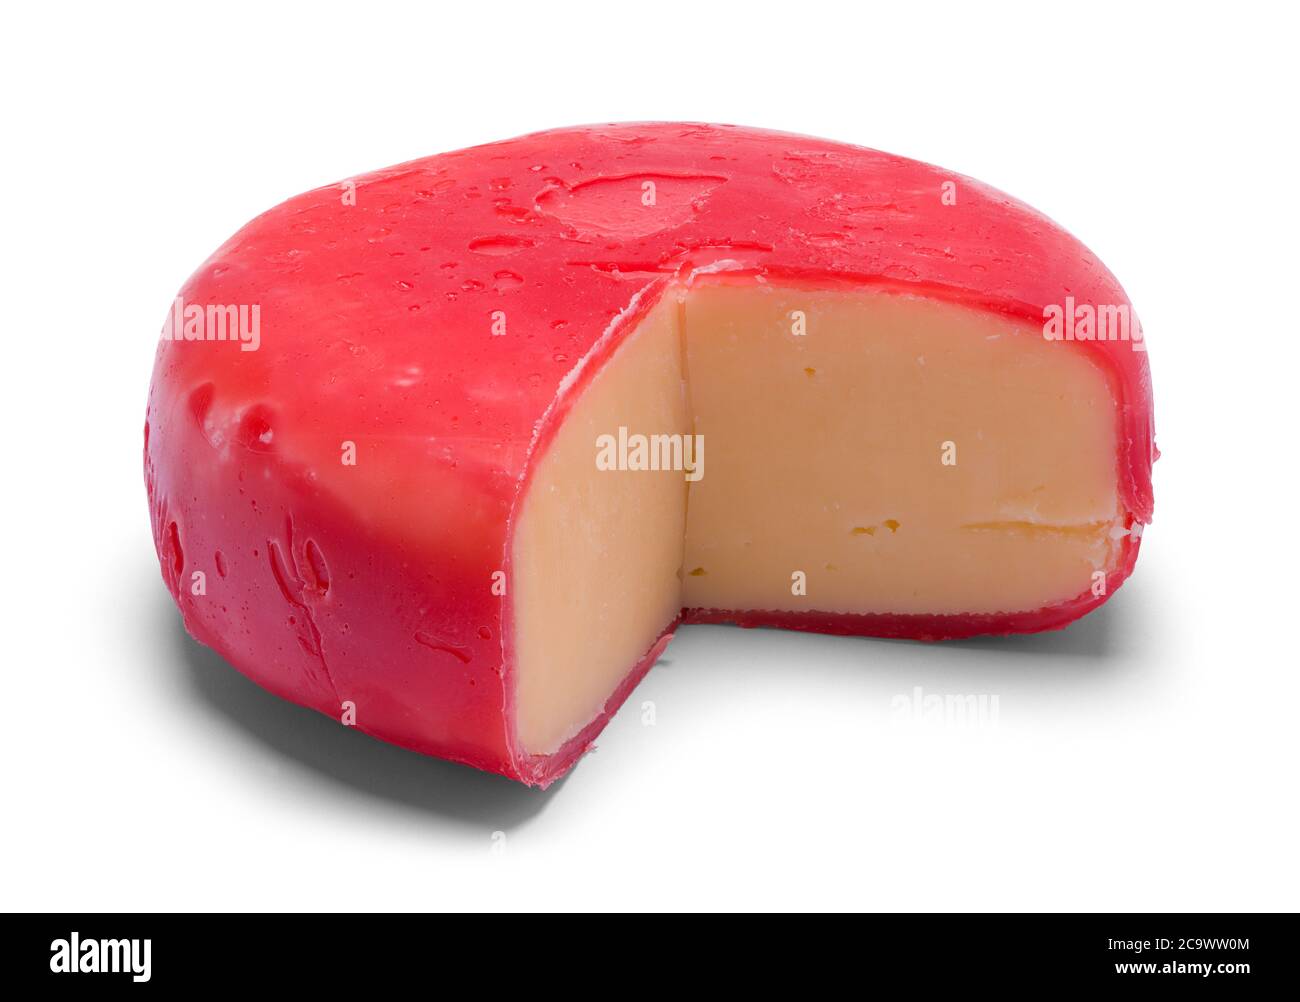 Red Loaf of Gouda Cheese Isolated on White Stock Photo - Alamy